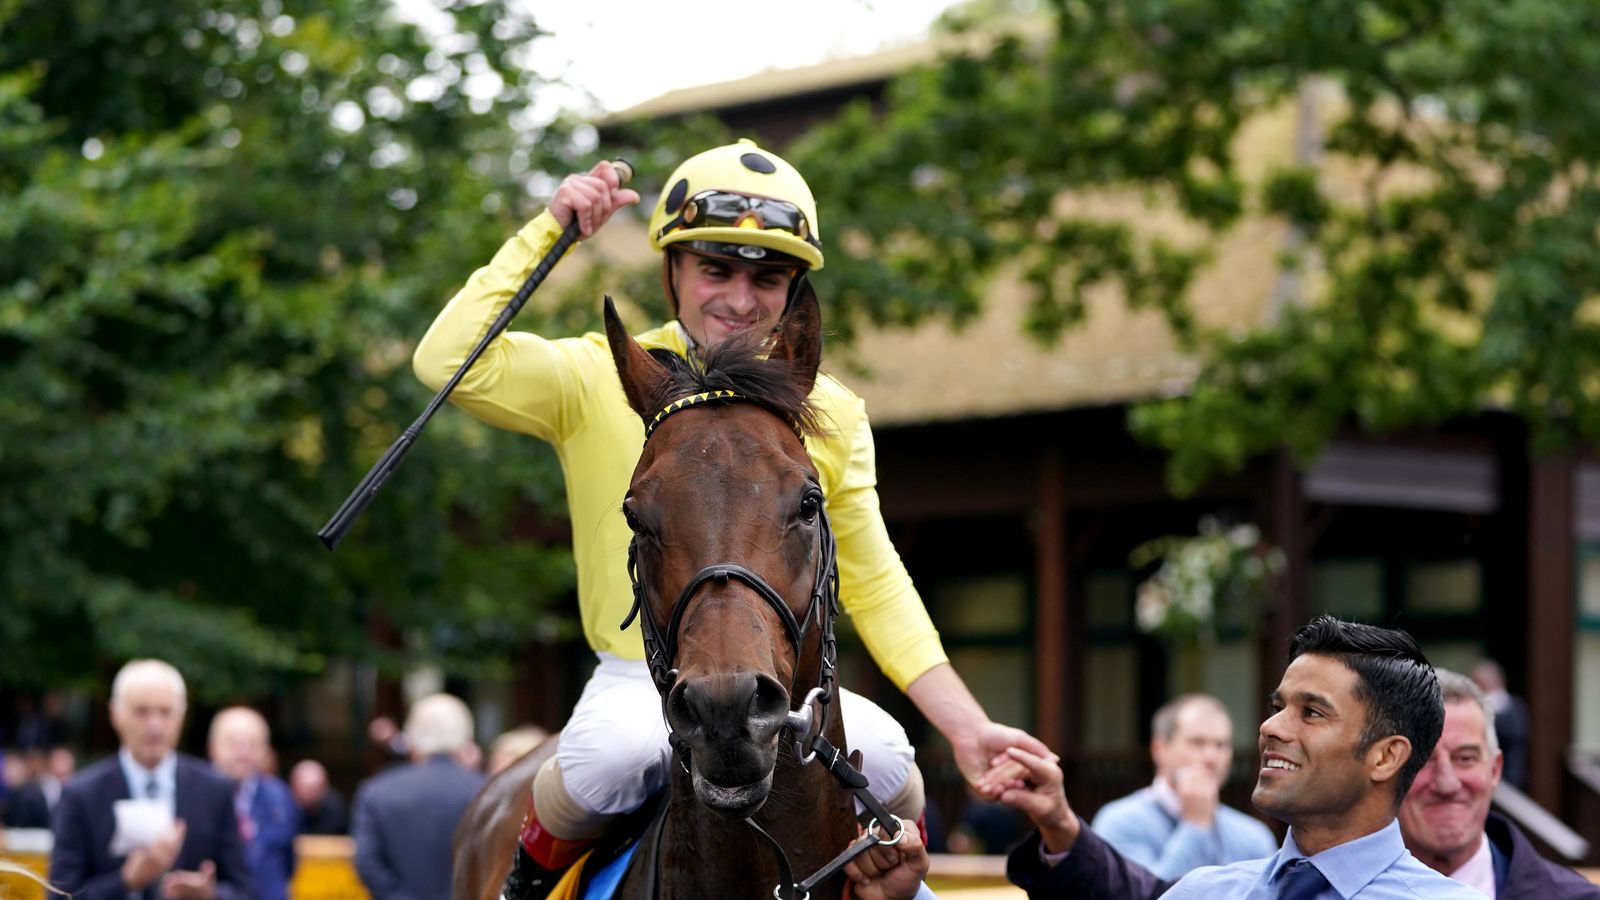 Haydock Sprint Cup: Kevin Ryan’s Emaraaty Ana takes on 16 rivals including Minzaal and Naval Crown